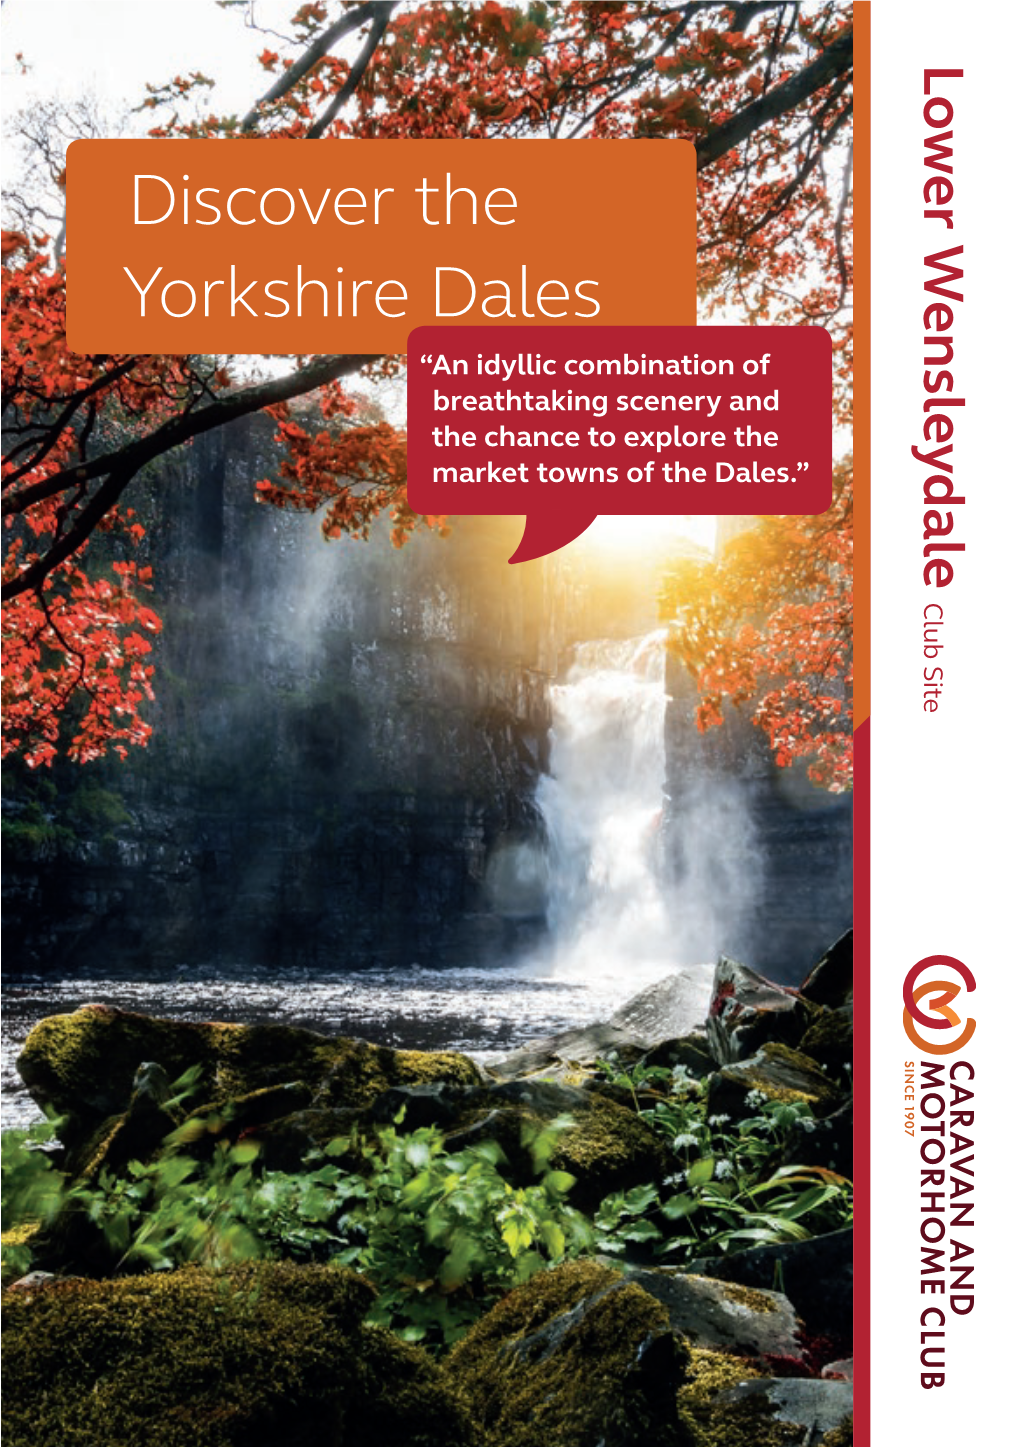 Discover the Yorkshire Dales “An Idyllic Combination of Breathtaking Scenery and the Chance to Explore the Market Towns of the Dales.” Club Site Club Durham